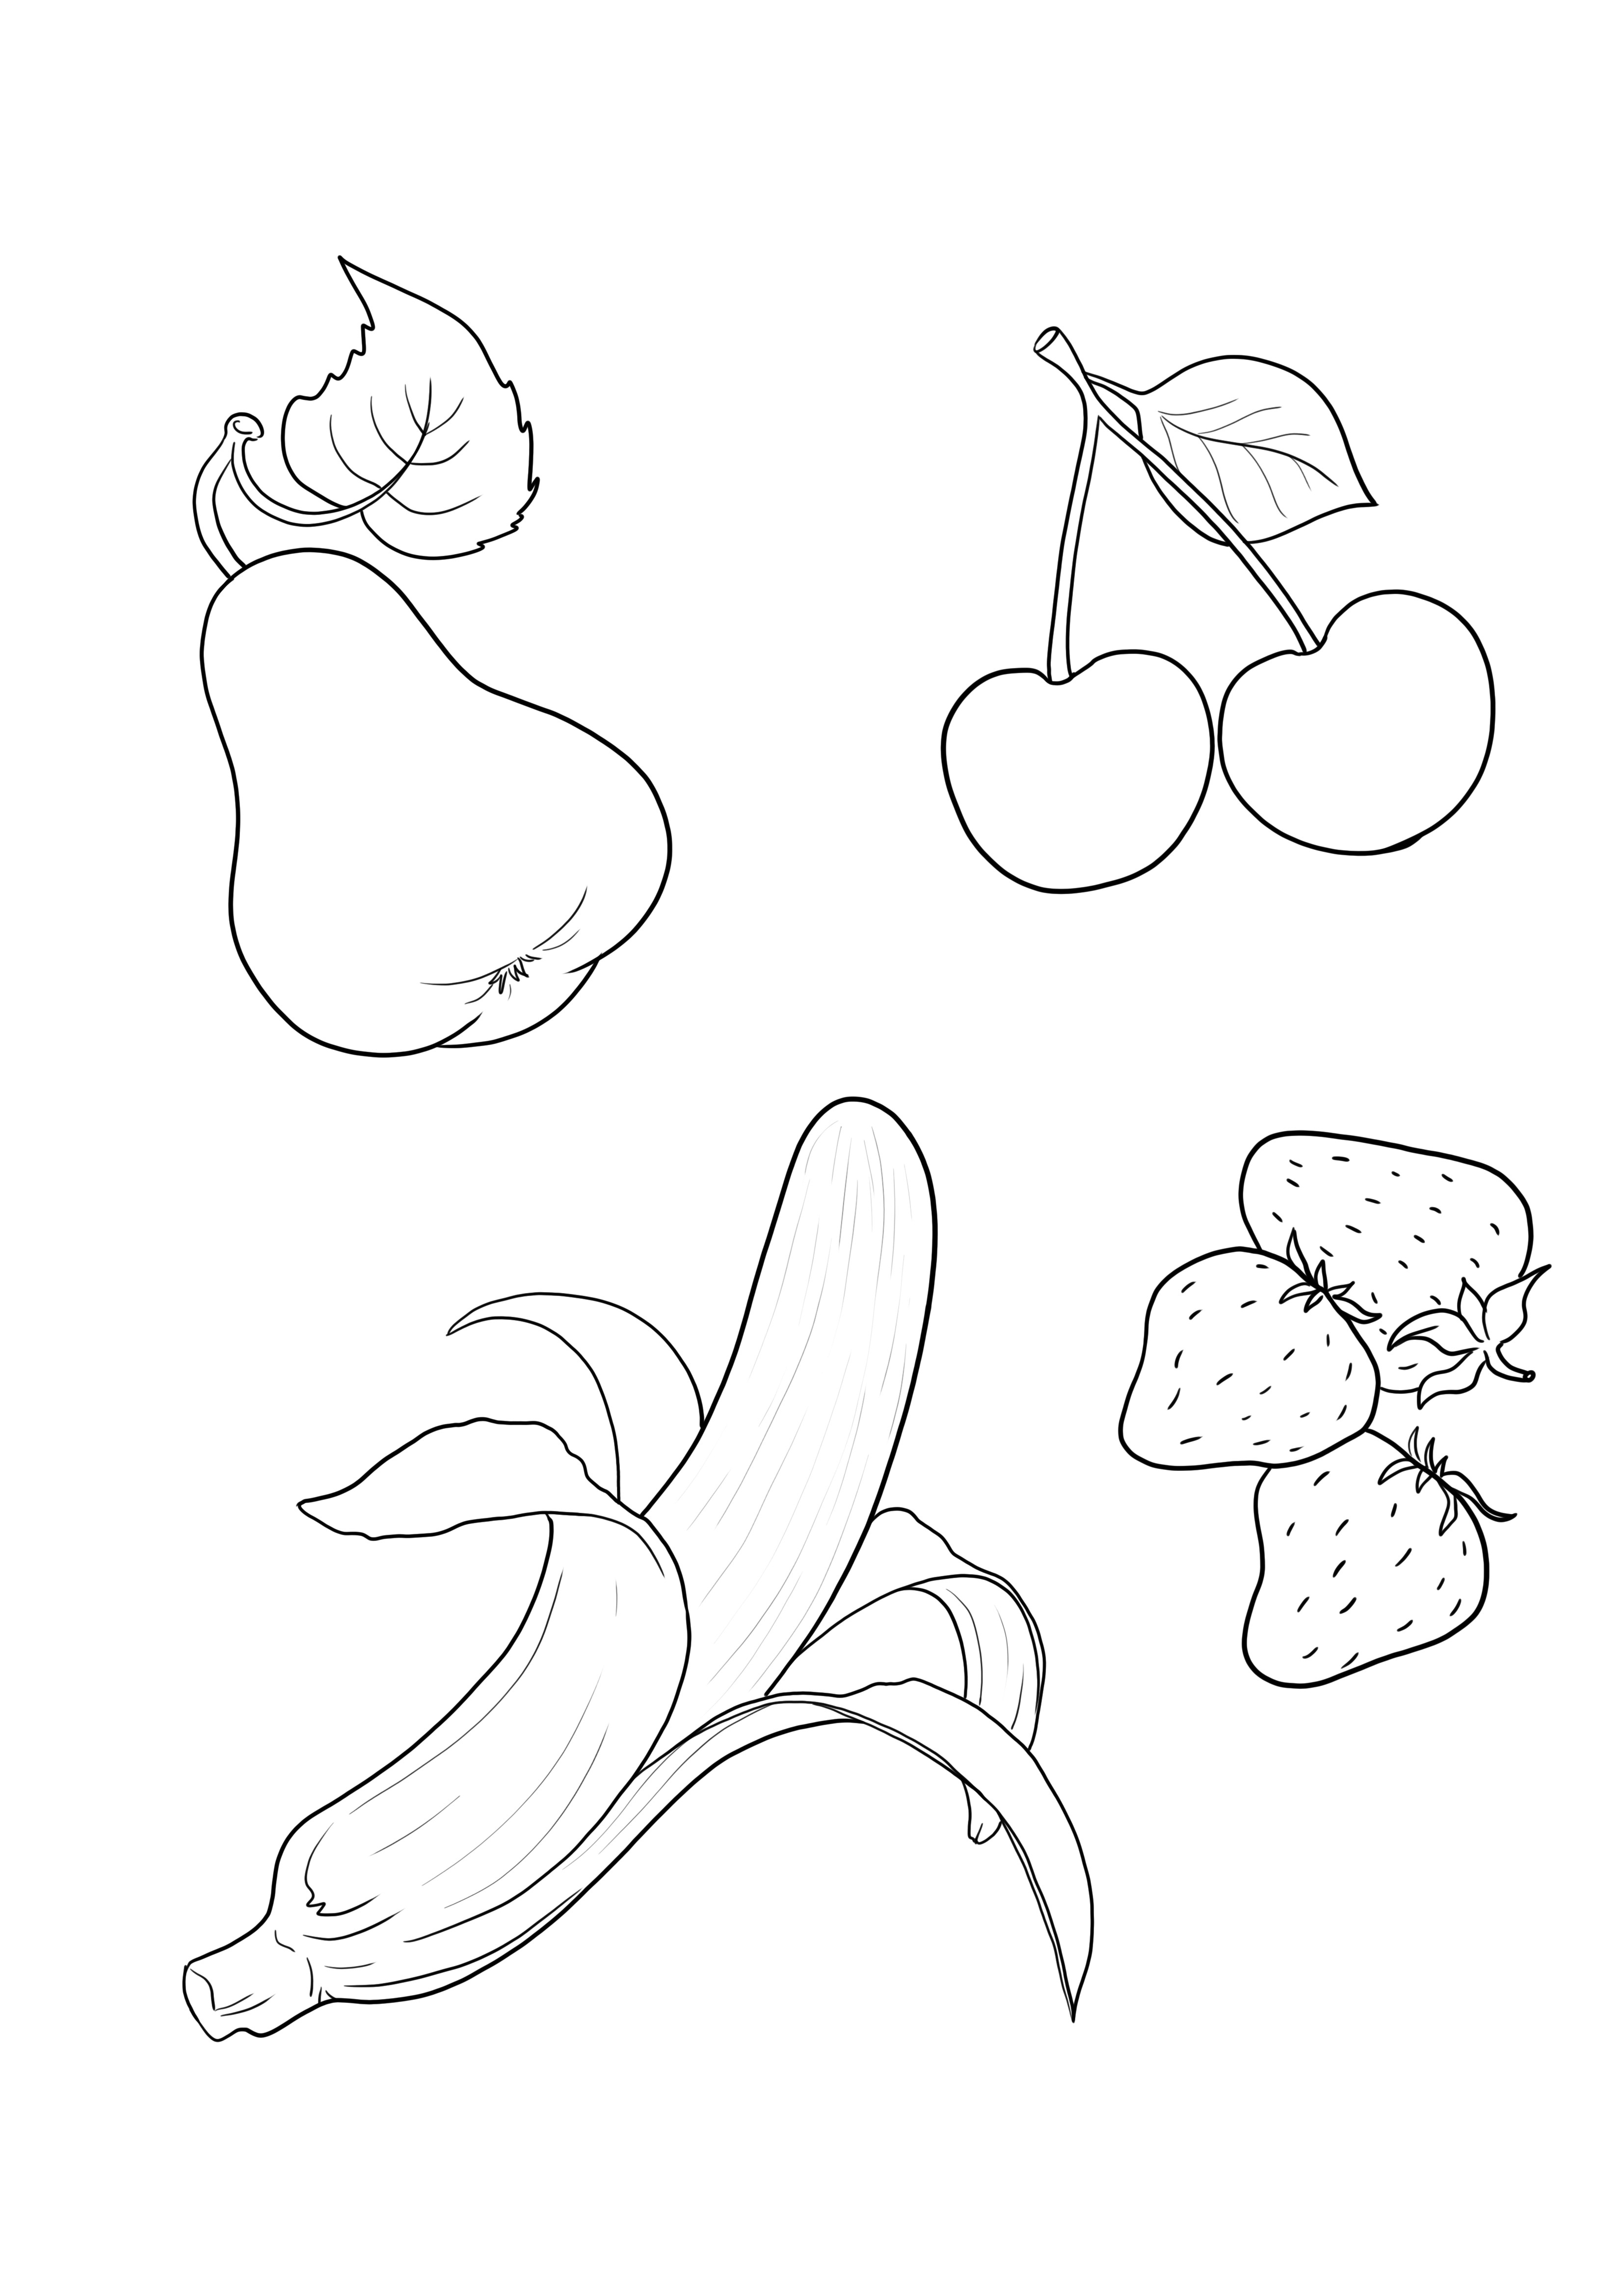 A super simple image of fruits to download and color for kids